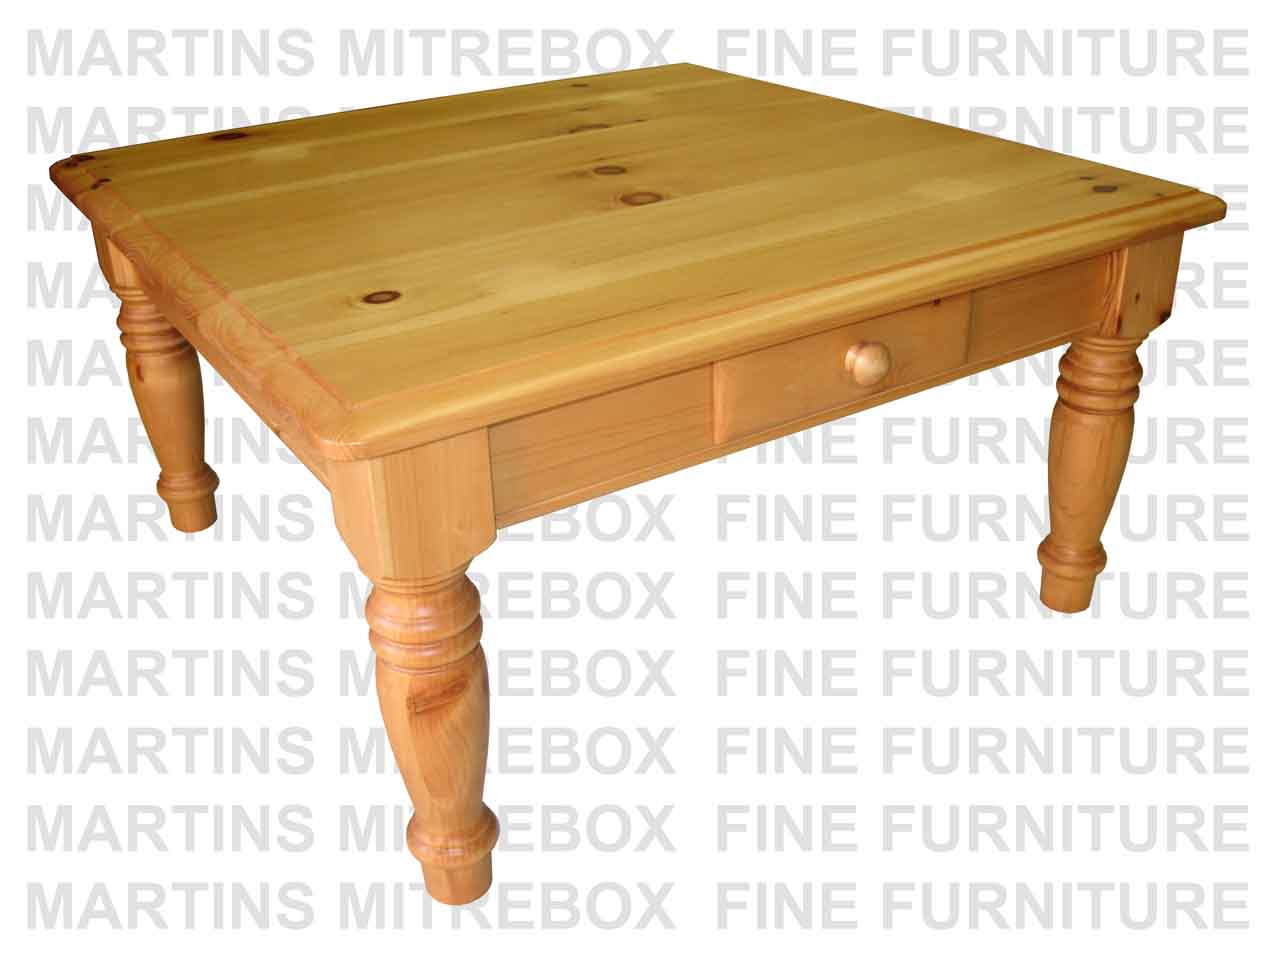 Oak Country Lane Coffee Table With 2 Drawers   36''D x 36''W x 19''H